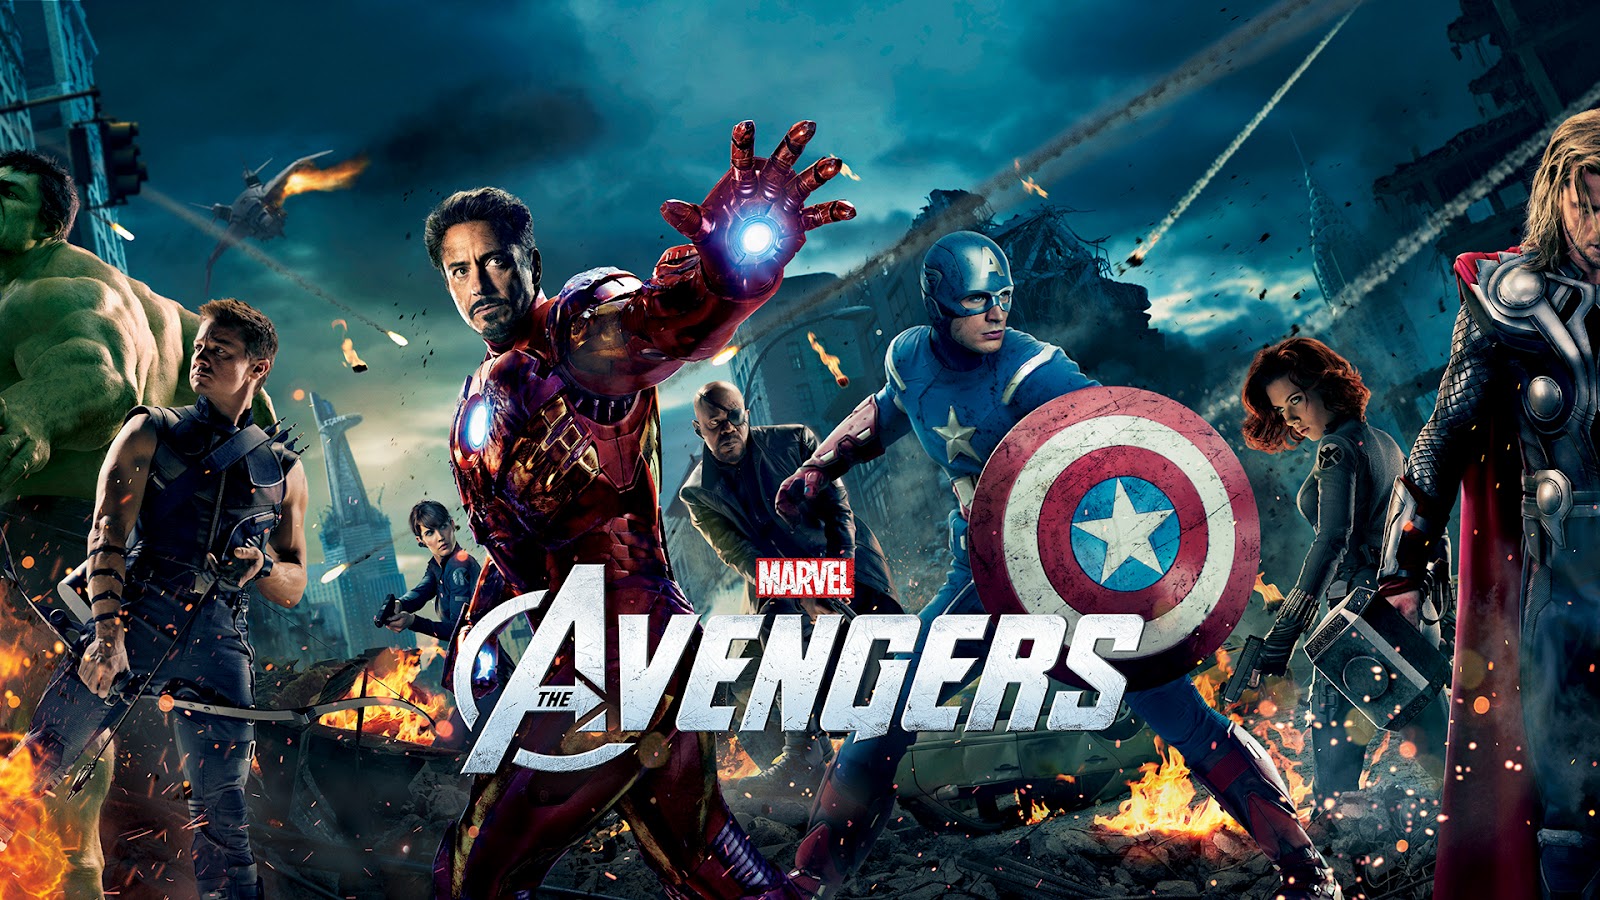 Free Hd Wallpapers The Avengers Hd Wallpapers 1600x900